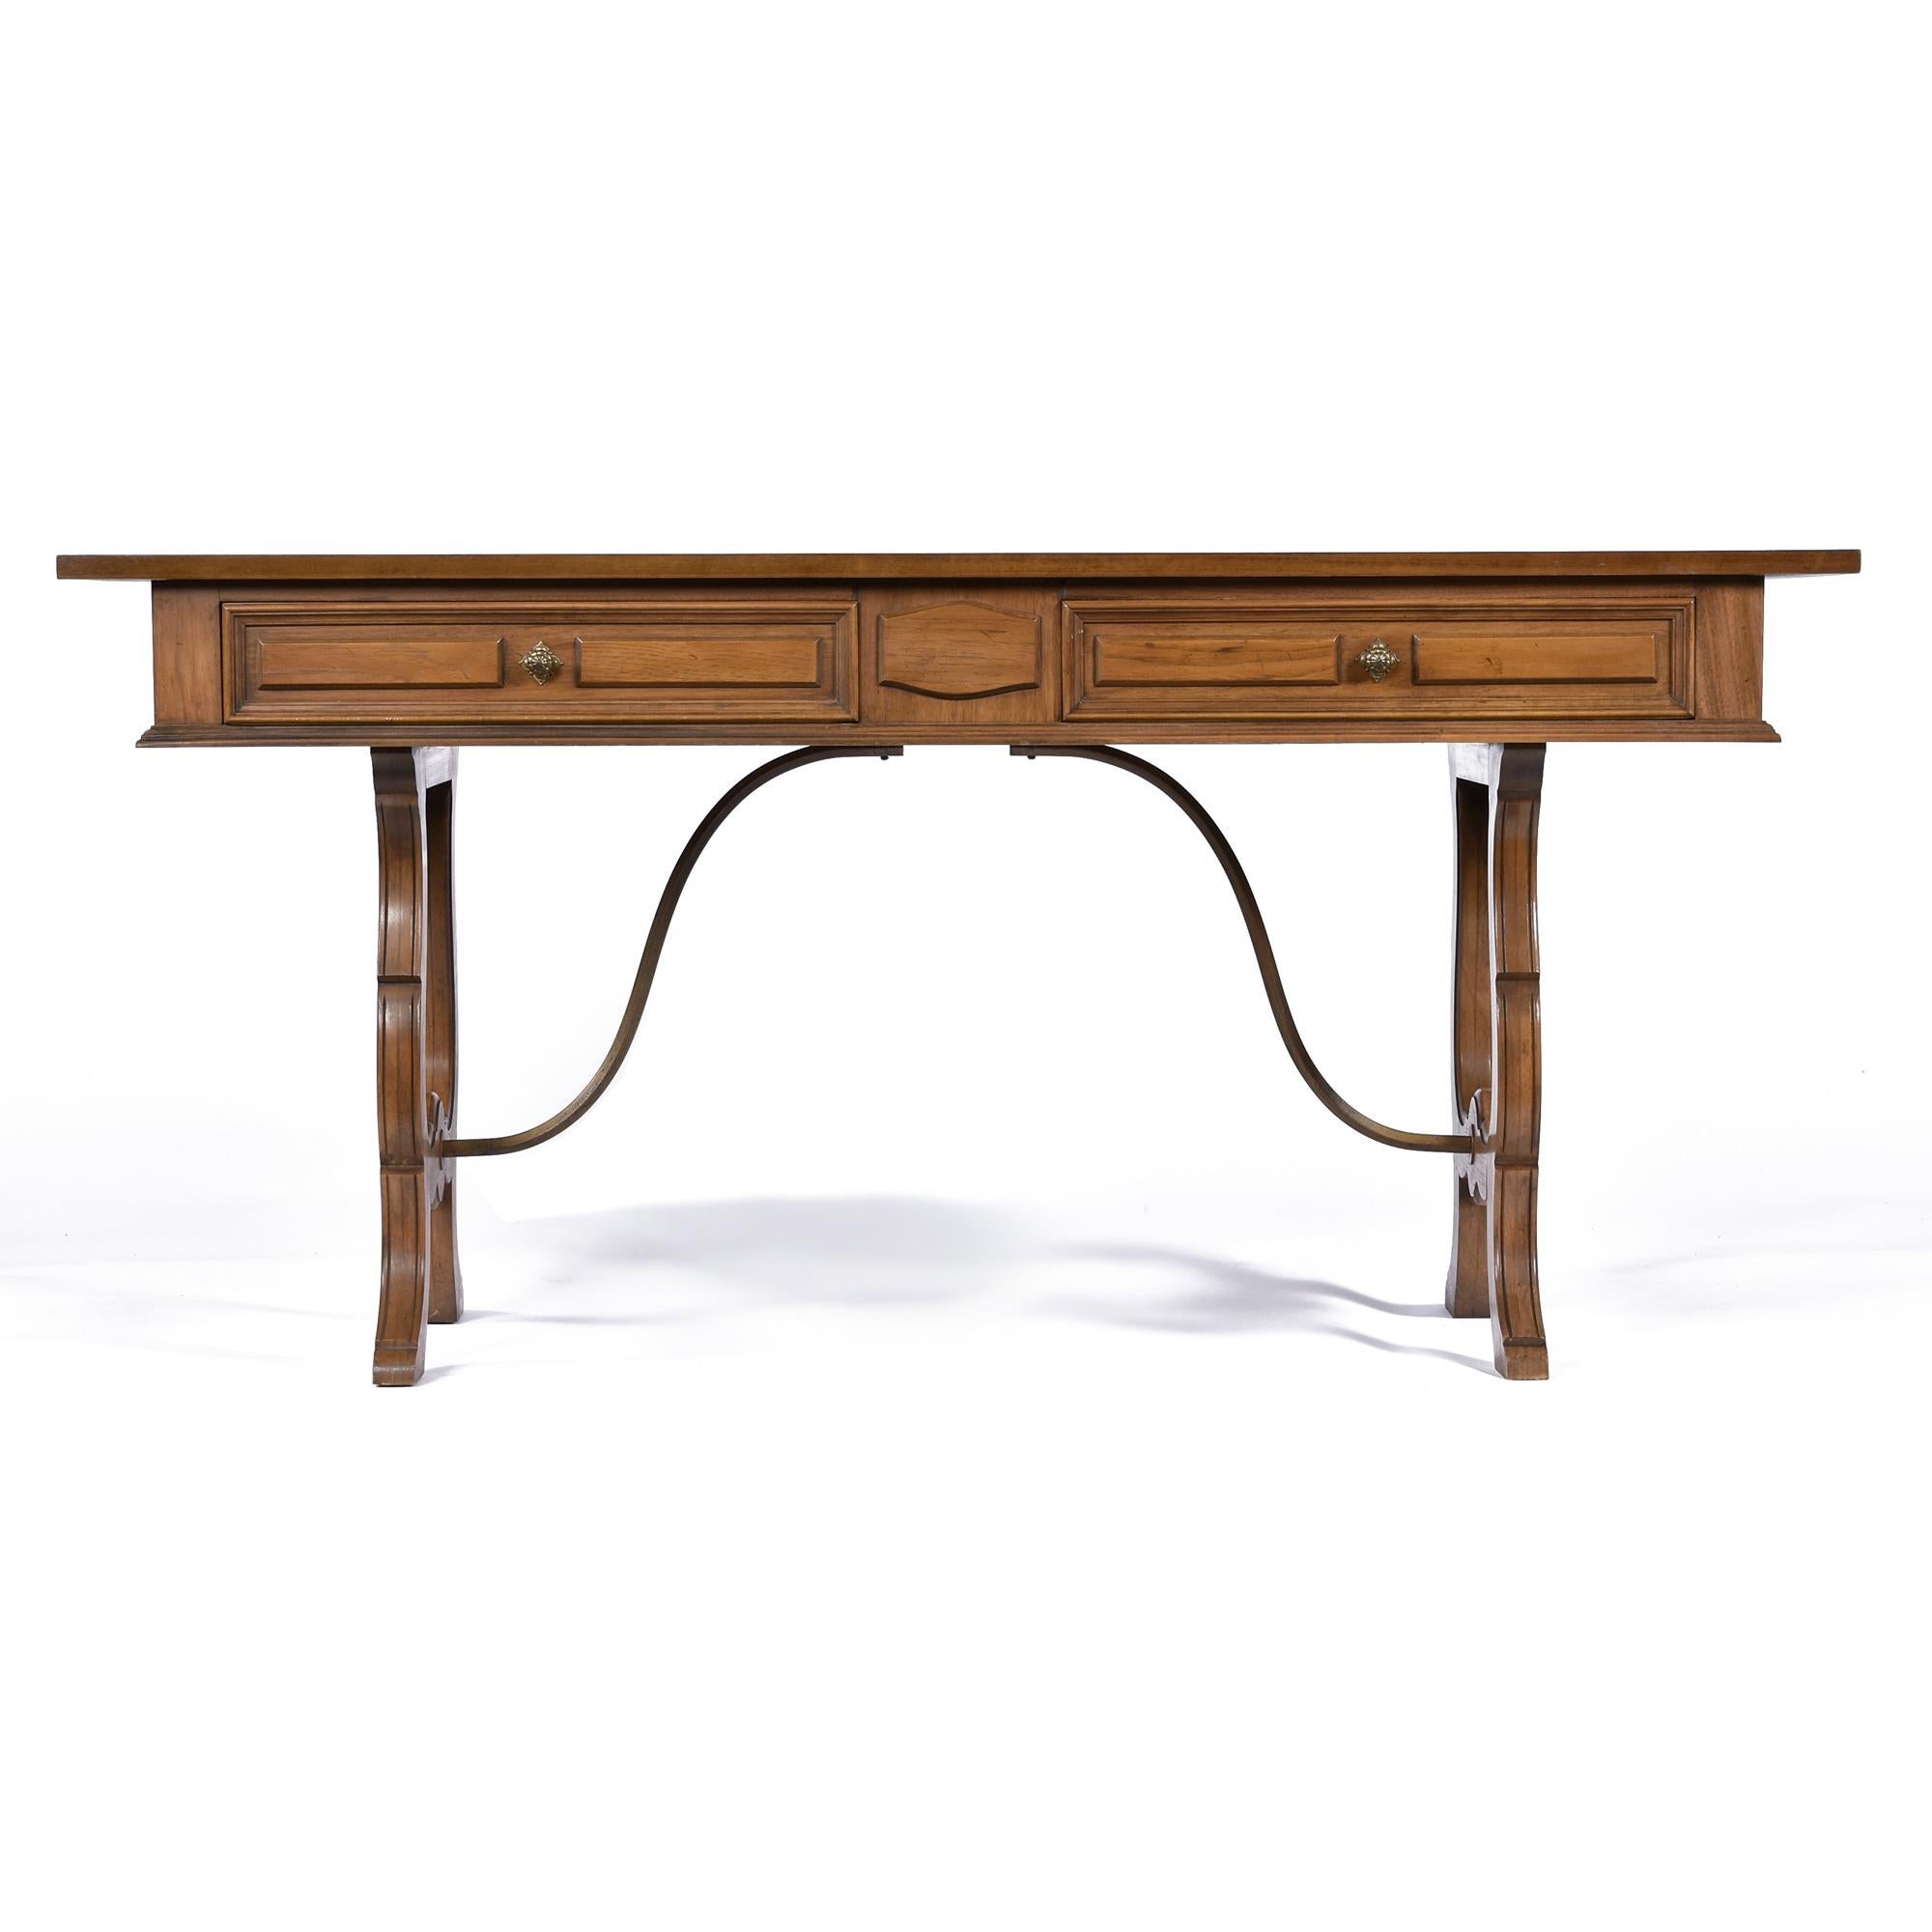 1960's English Regency Style Pecan Desk Console by Thomasville In Excellent Condition For Sale In Chattanooga, TN